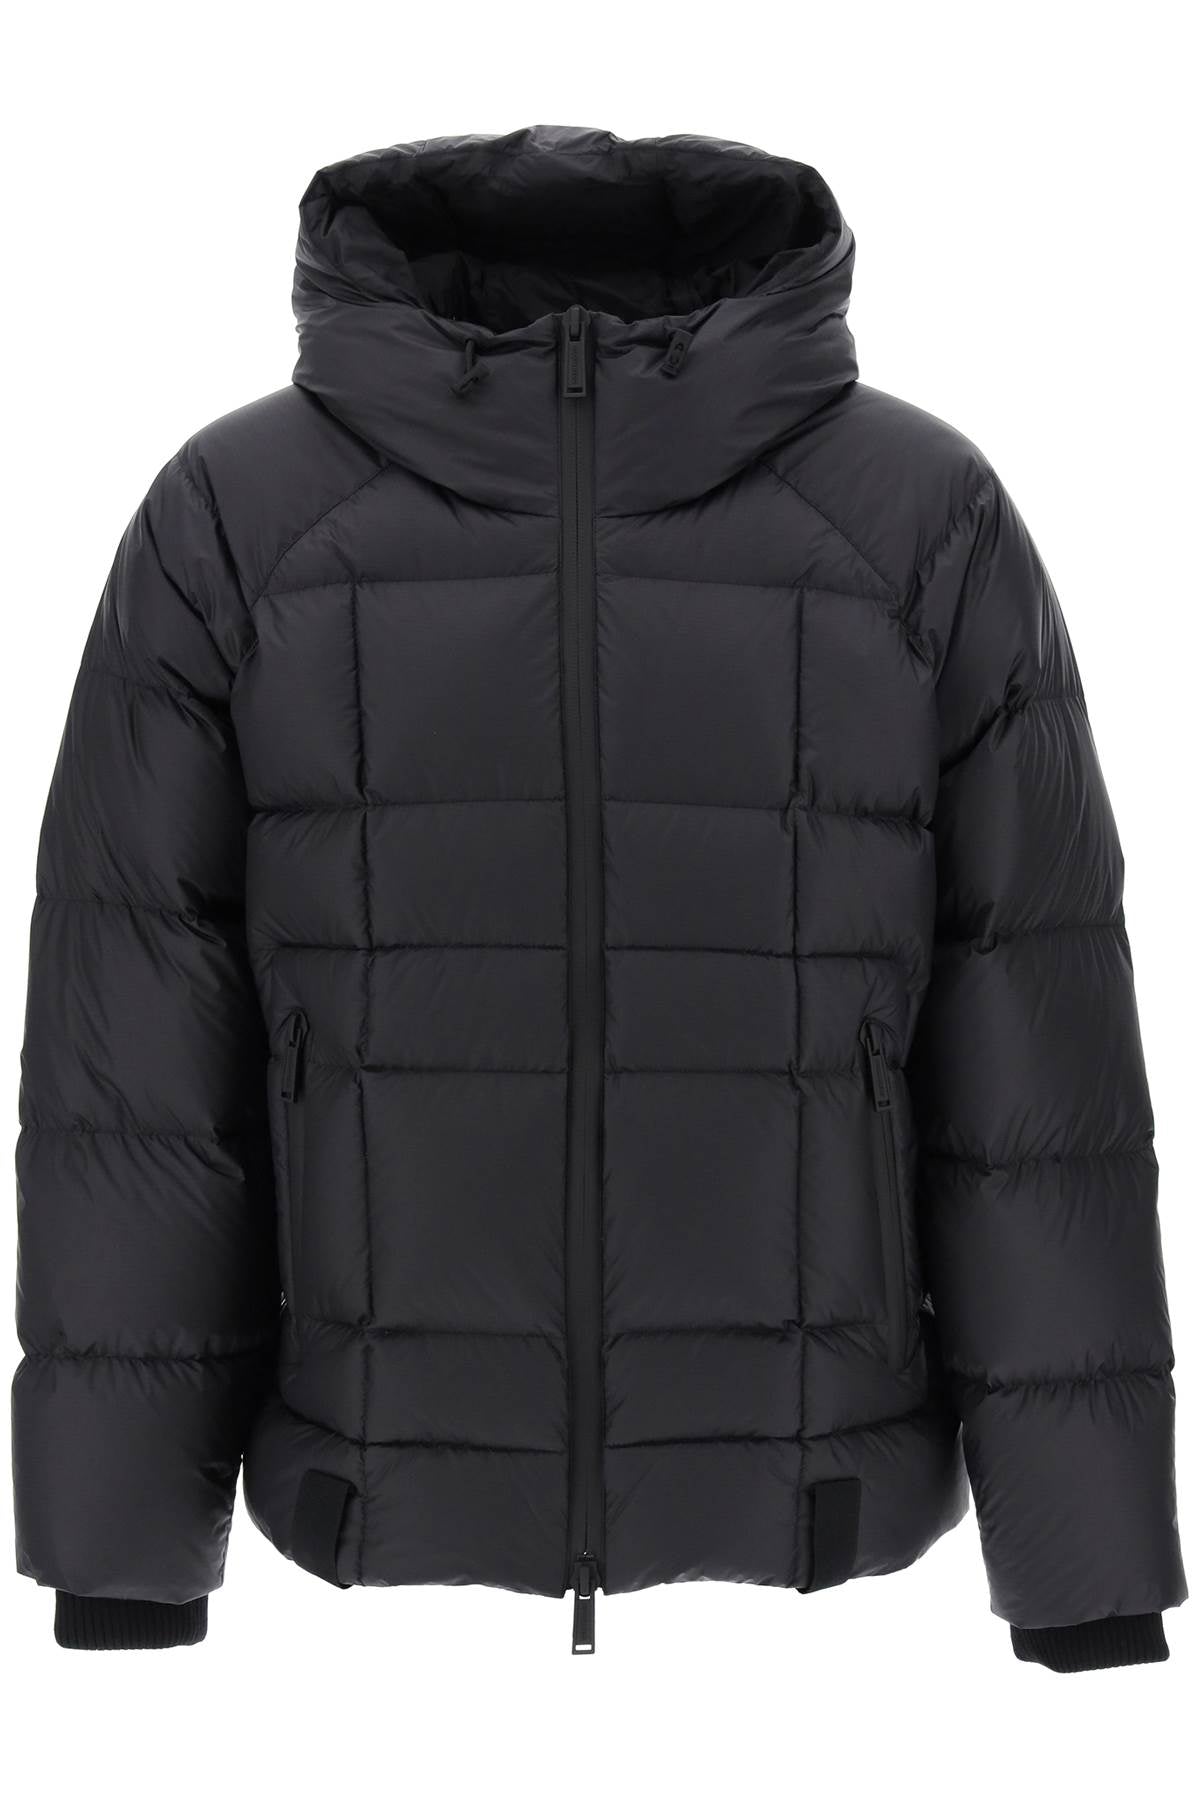 DSQUARED2 Mens Black Outerwear for FW23